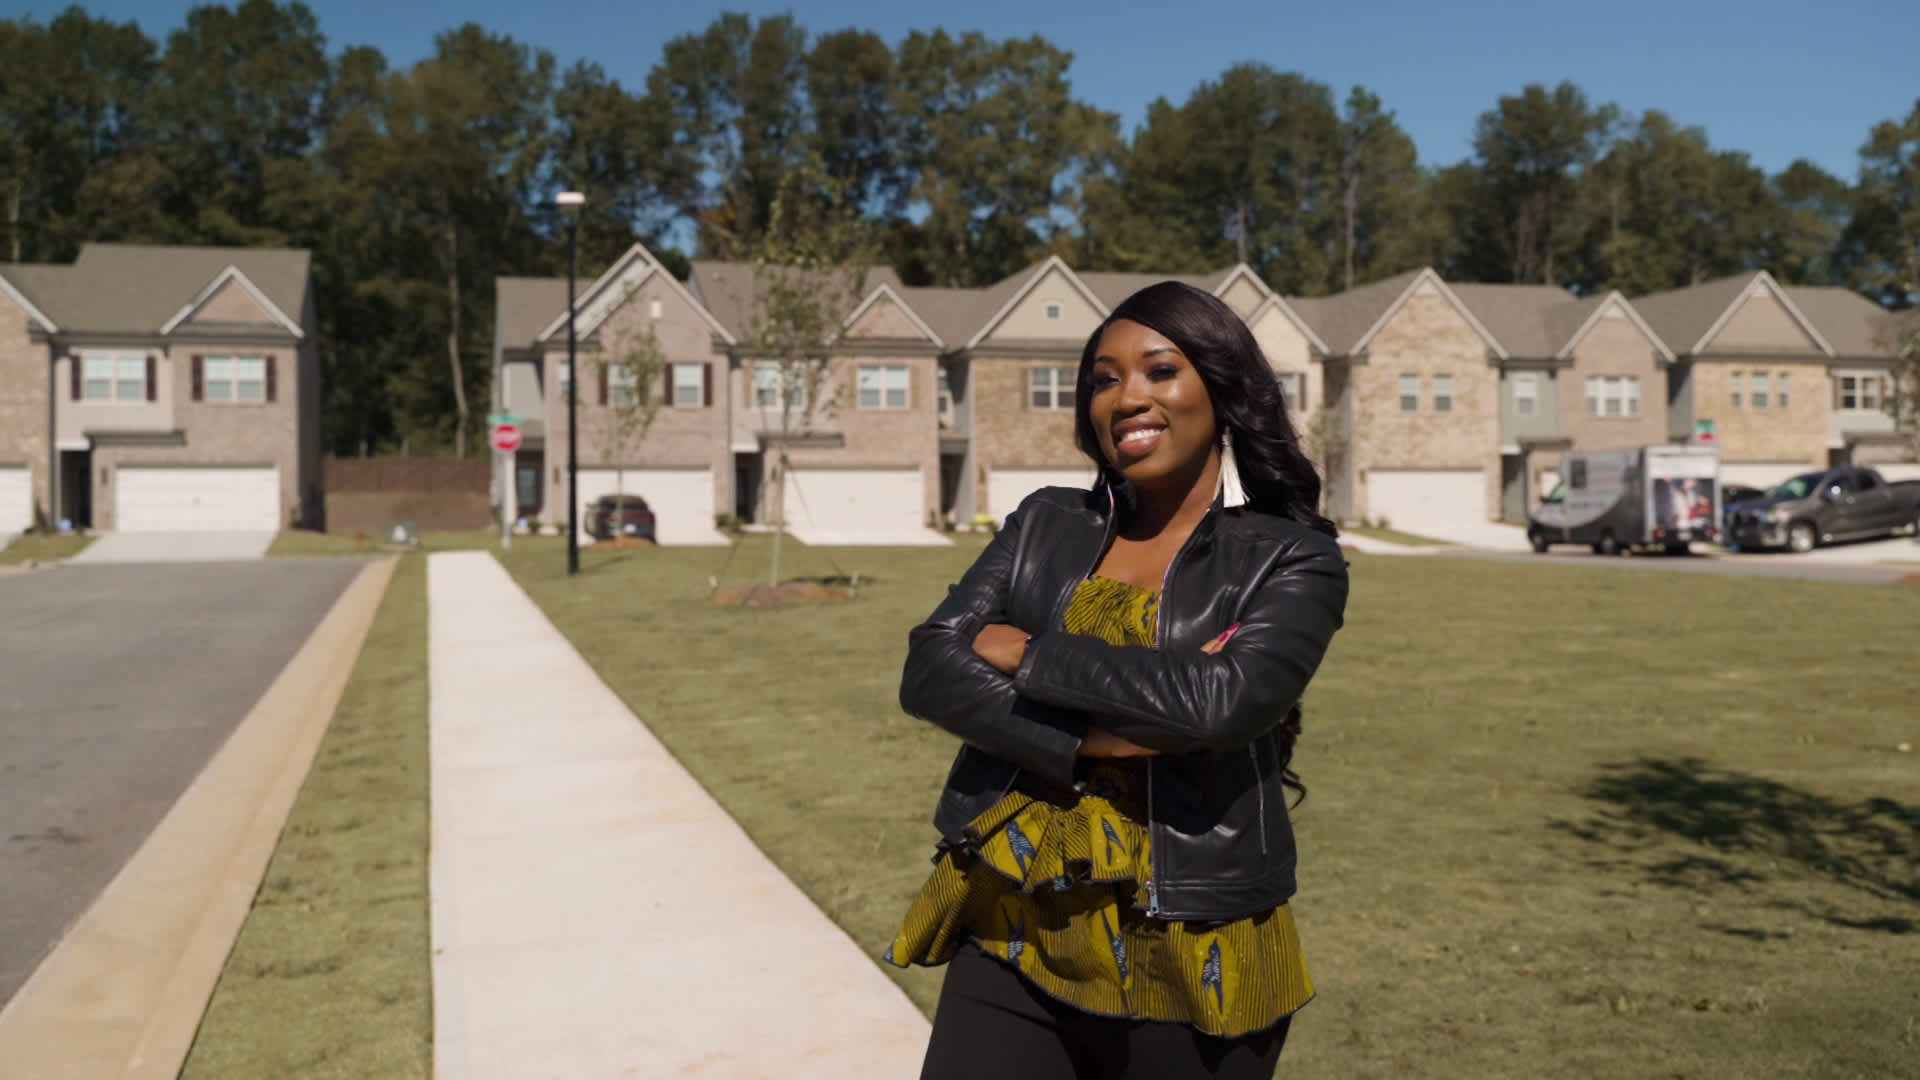 Krystal Anyang-Kusi bought and built her first home in Lawrenceville, Georgia.